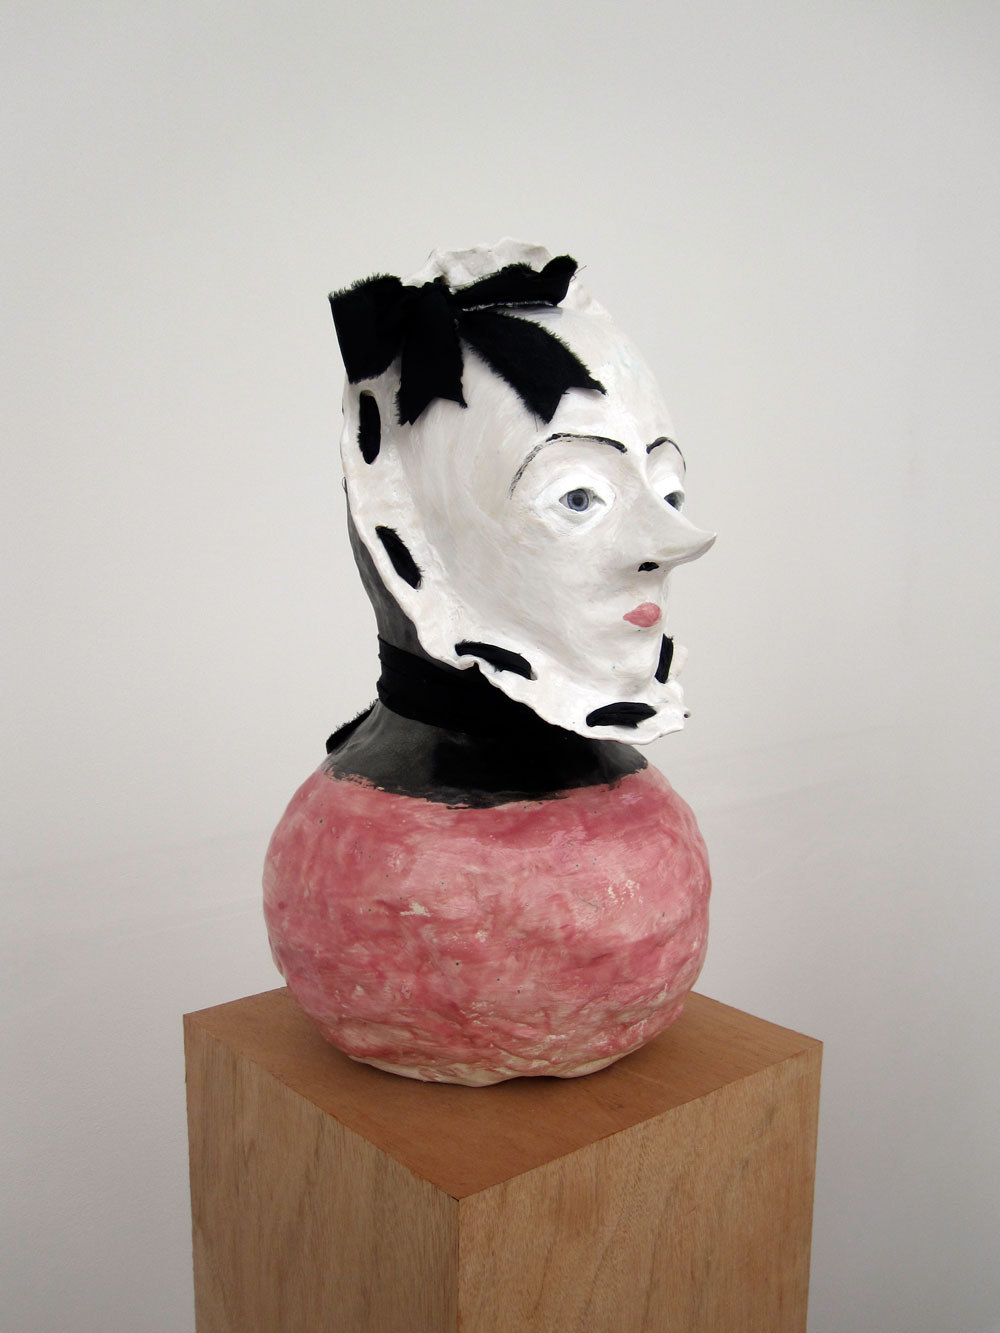 Jonathan Baldock, Dolly, 2009, Ceramic, cotton, glass eyes, clay, (h,1630mm x w.250mm x d.250mm), Cell Project Space